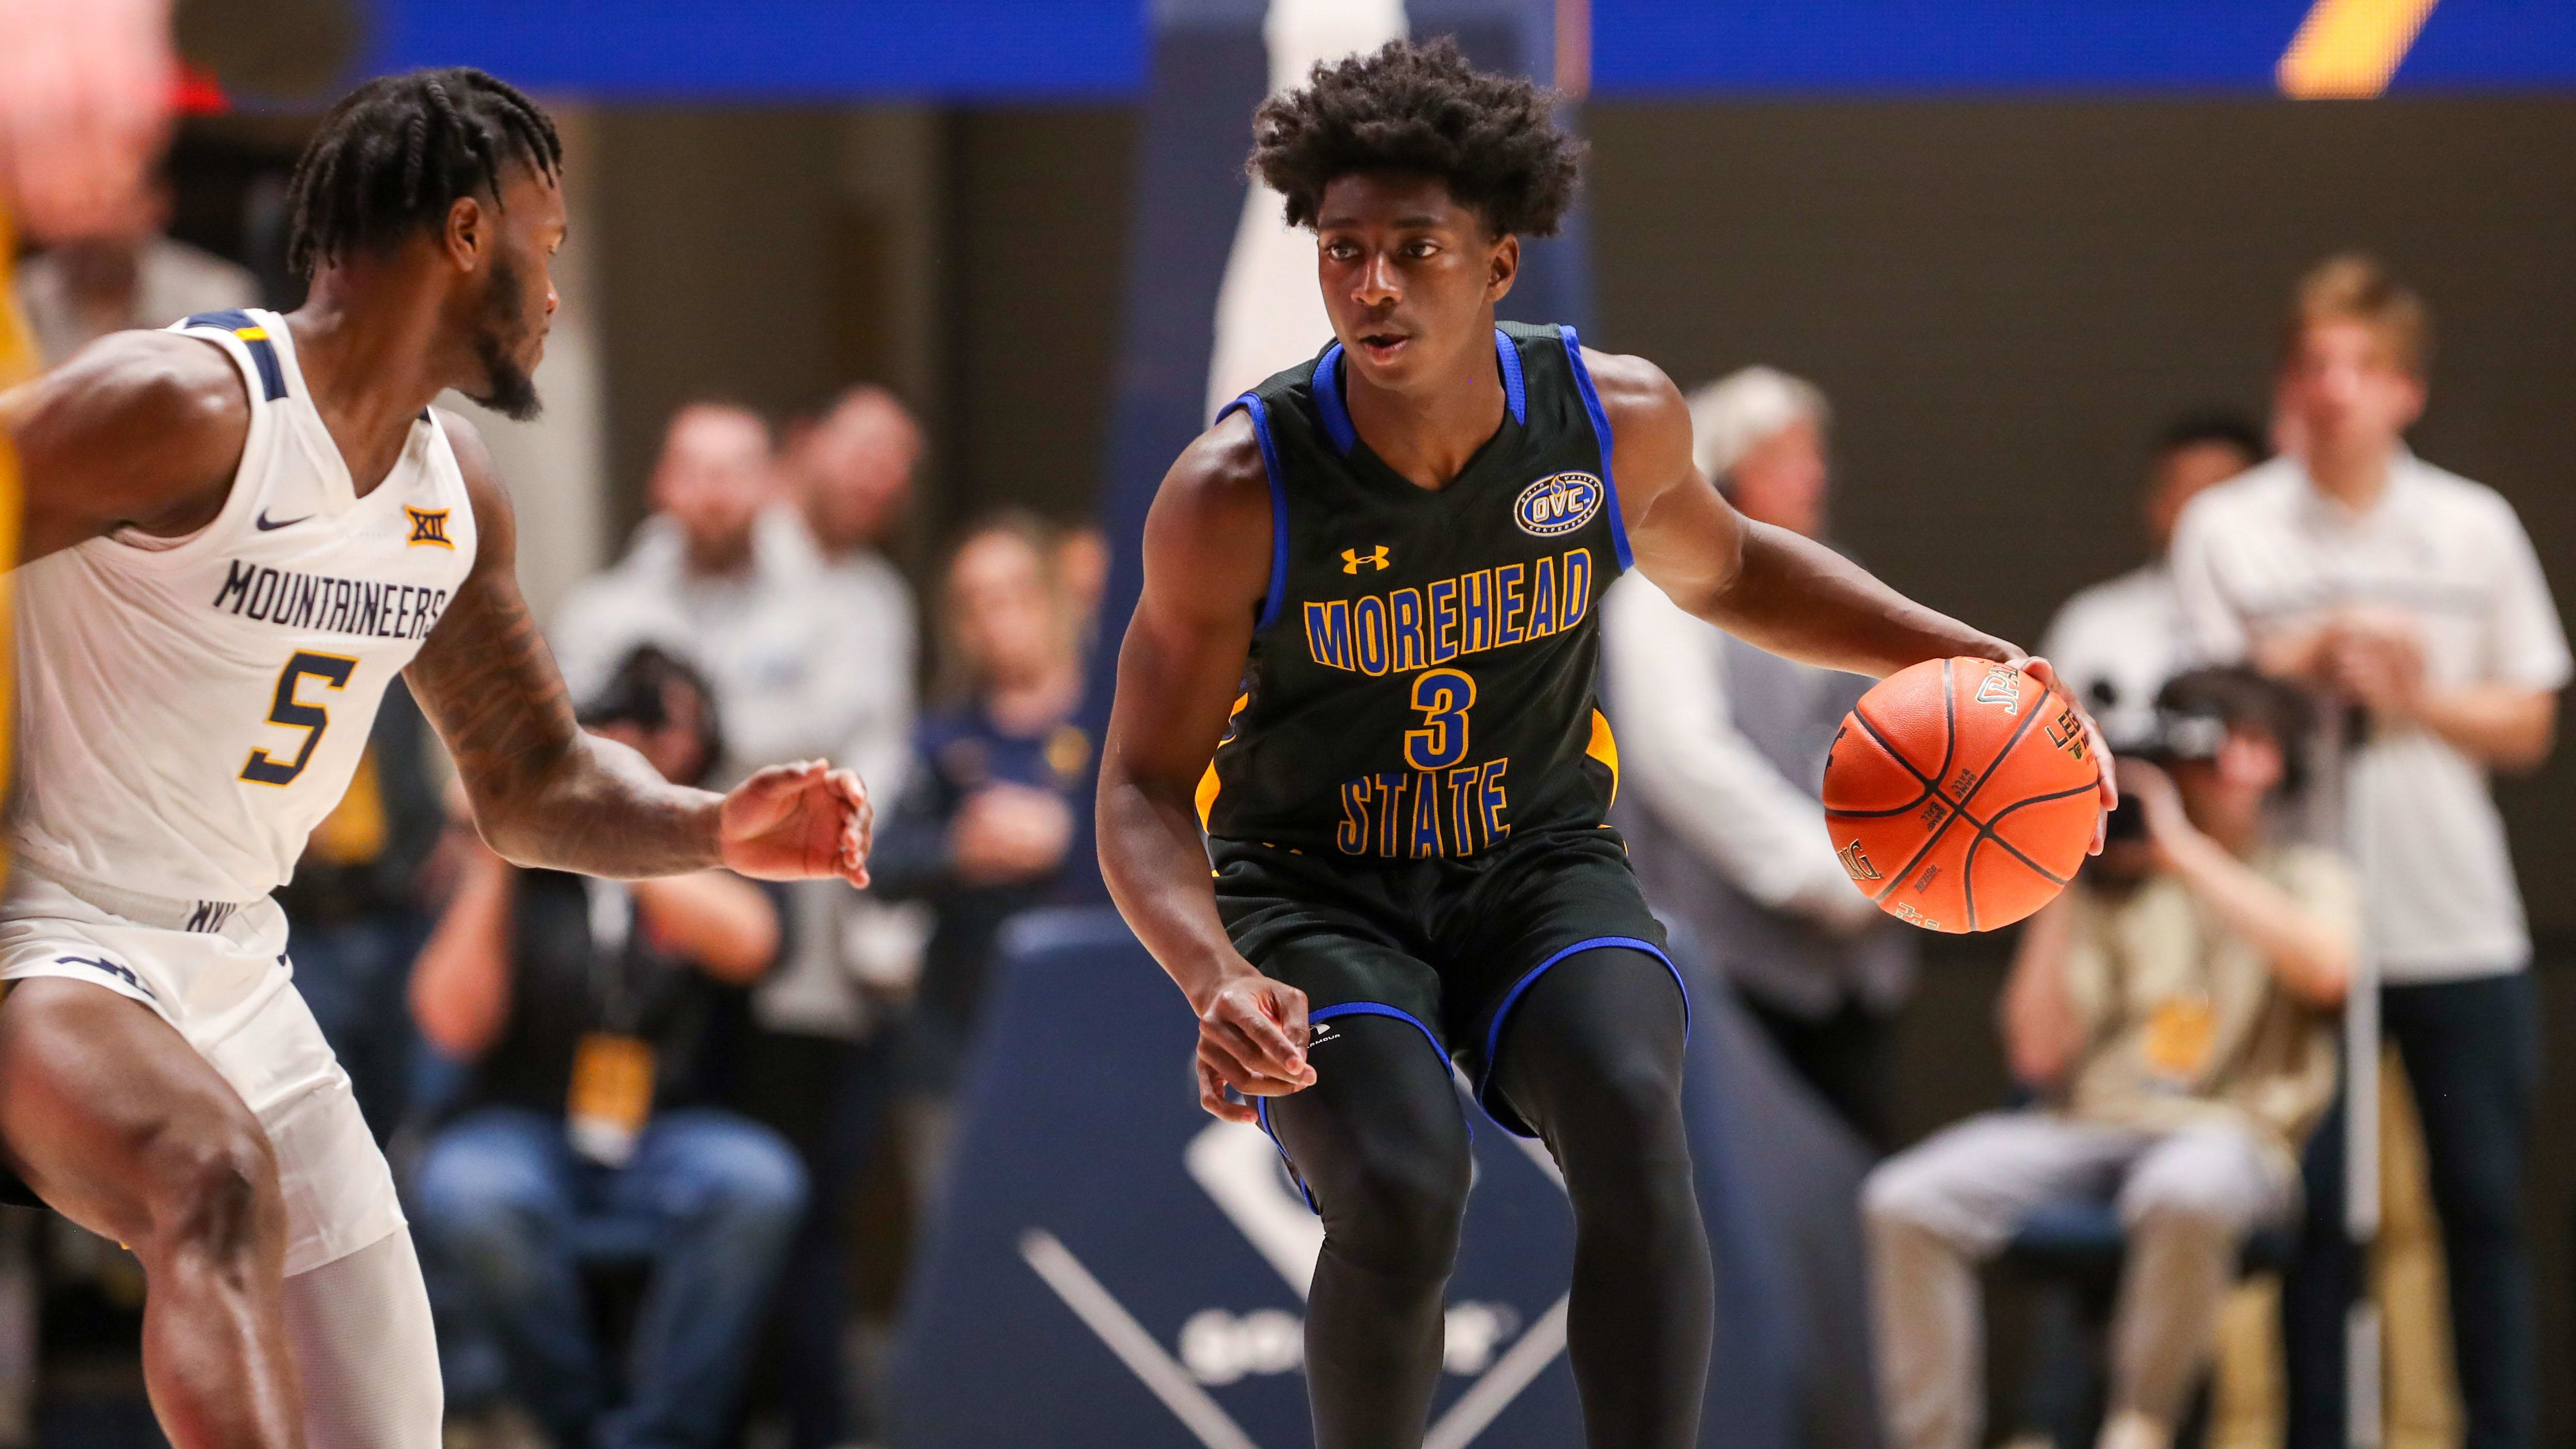 Drew Thelwell Commits to Iowa Basketball